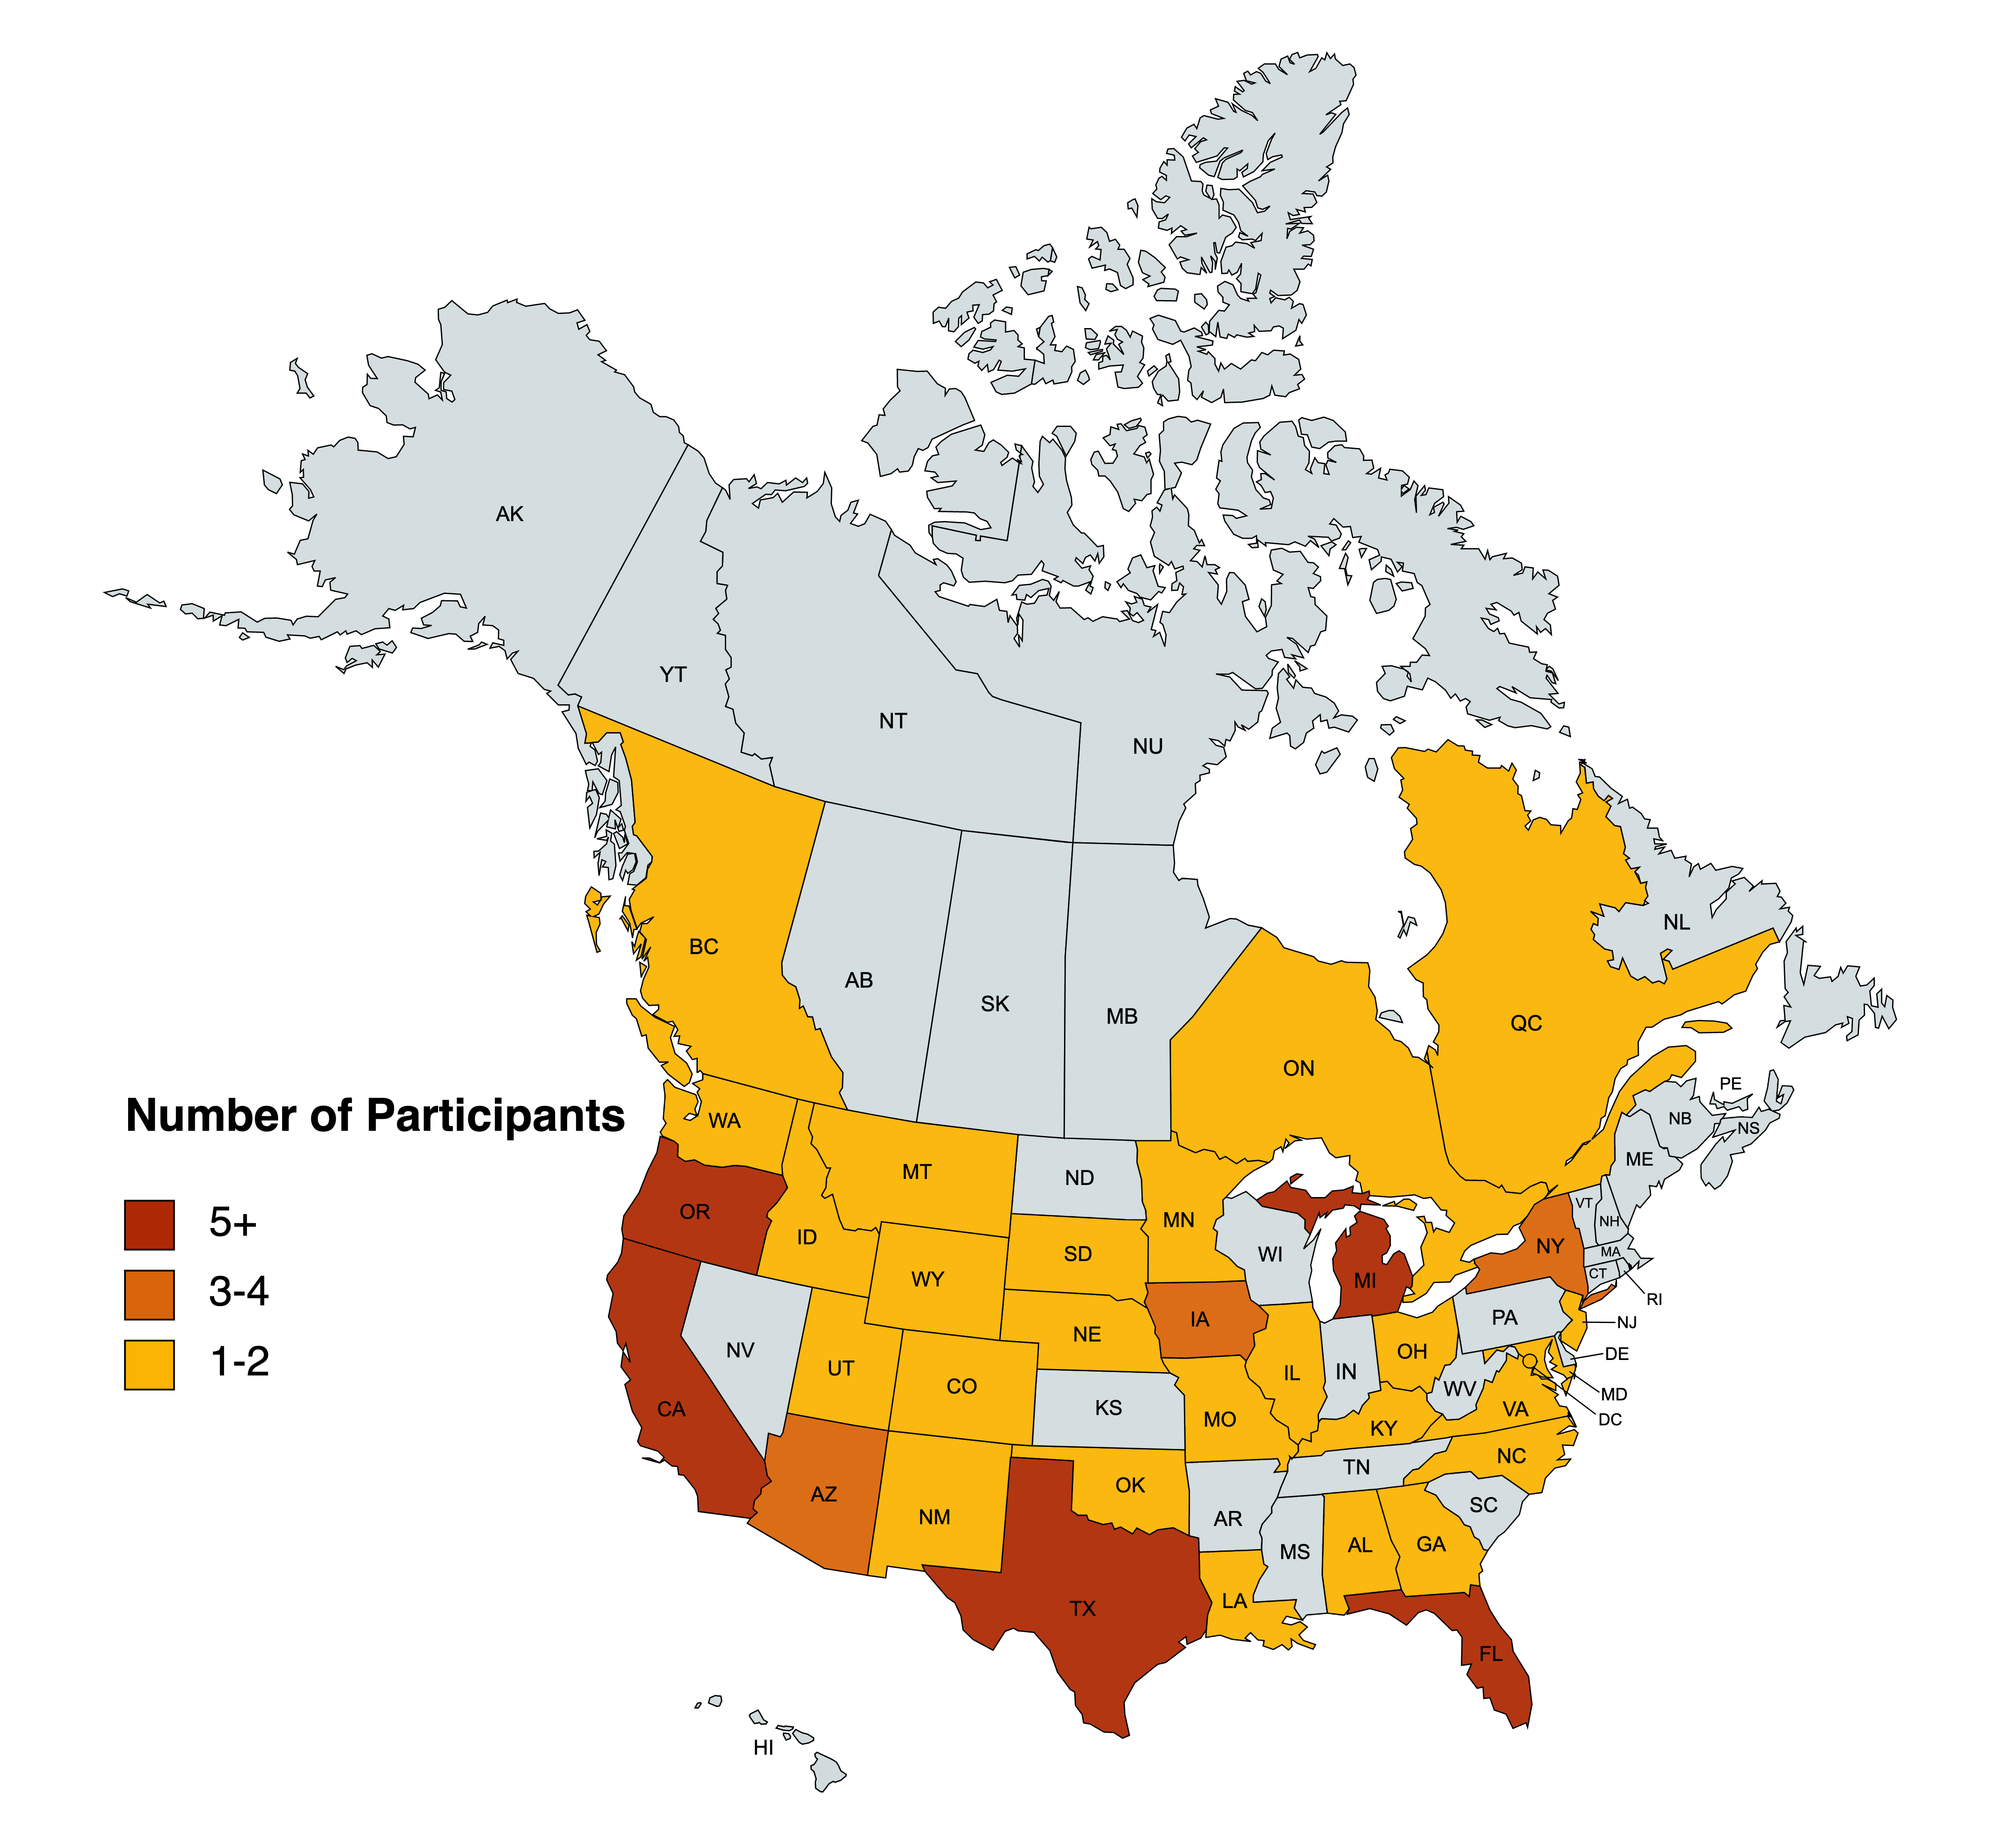 Map of US and Canada showing states and provinces with faculty workshop attendees.